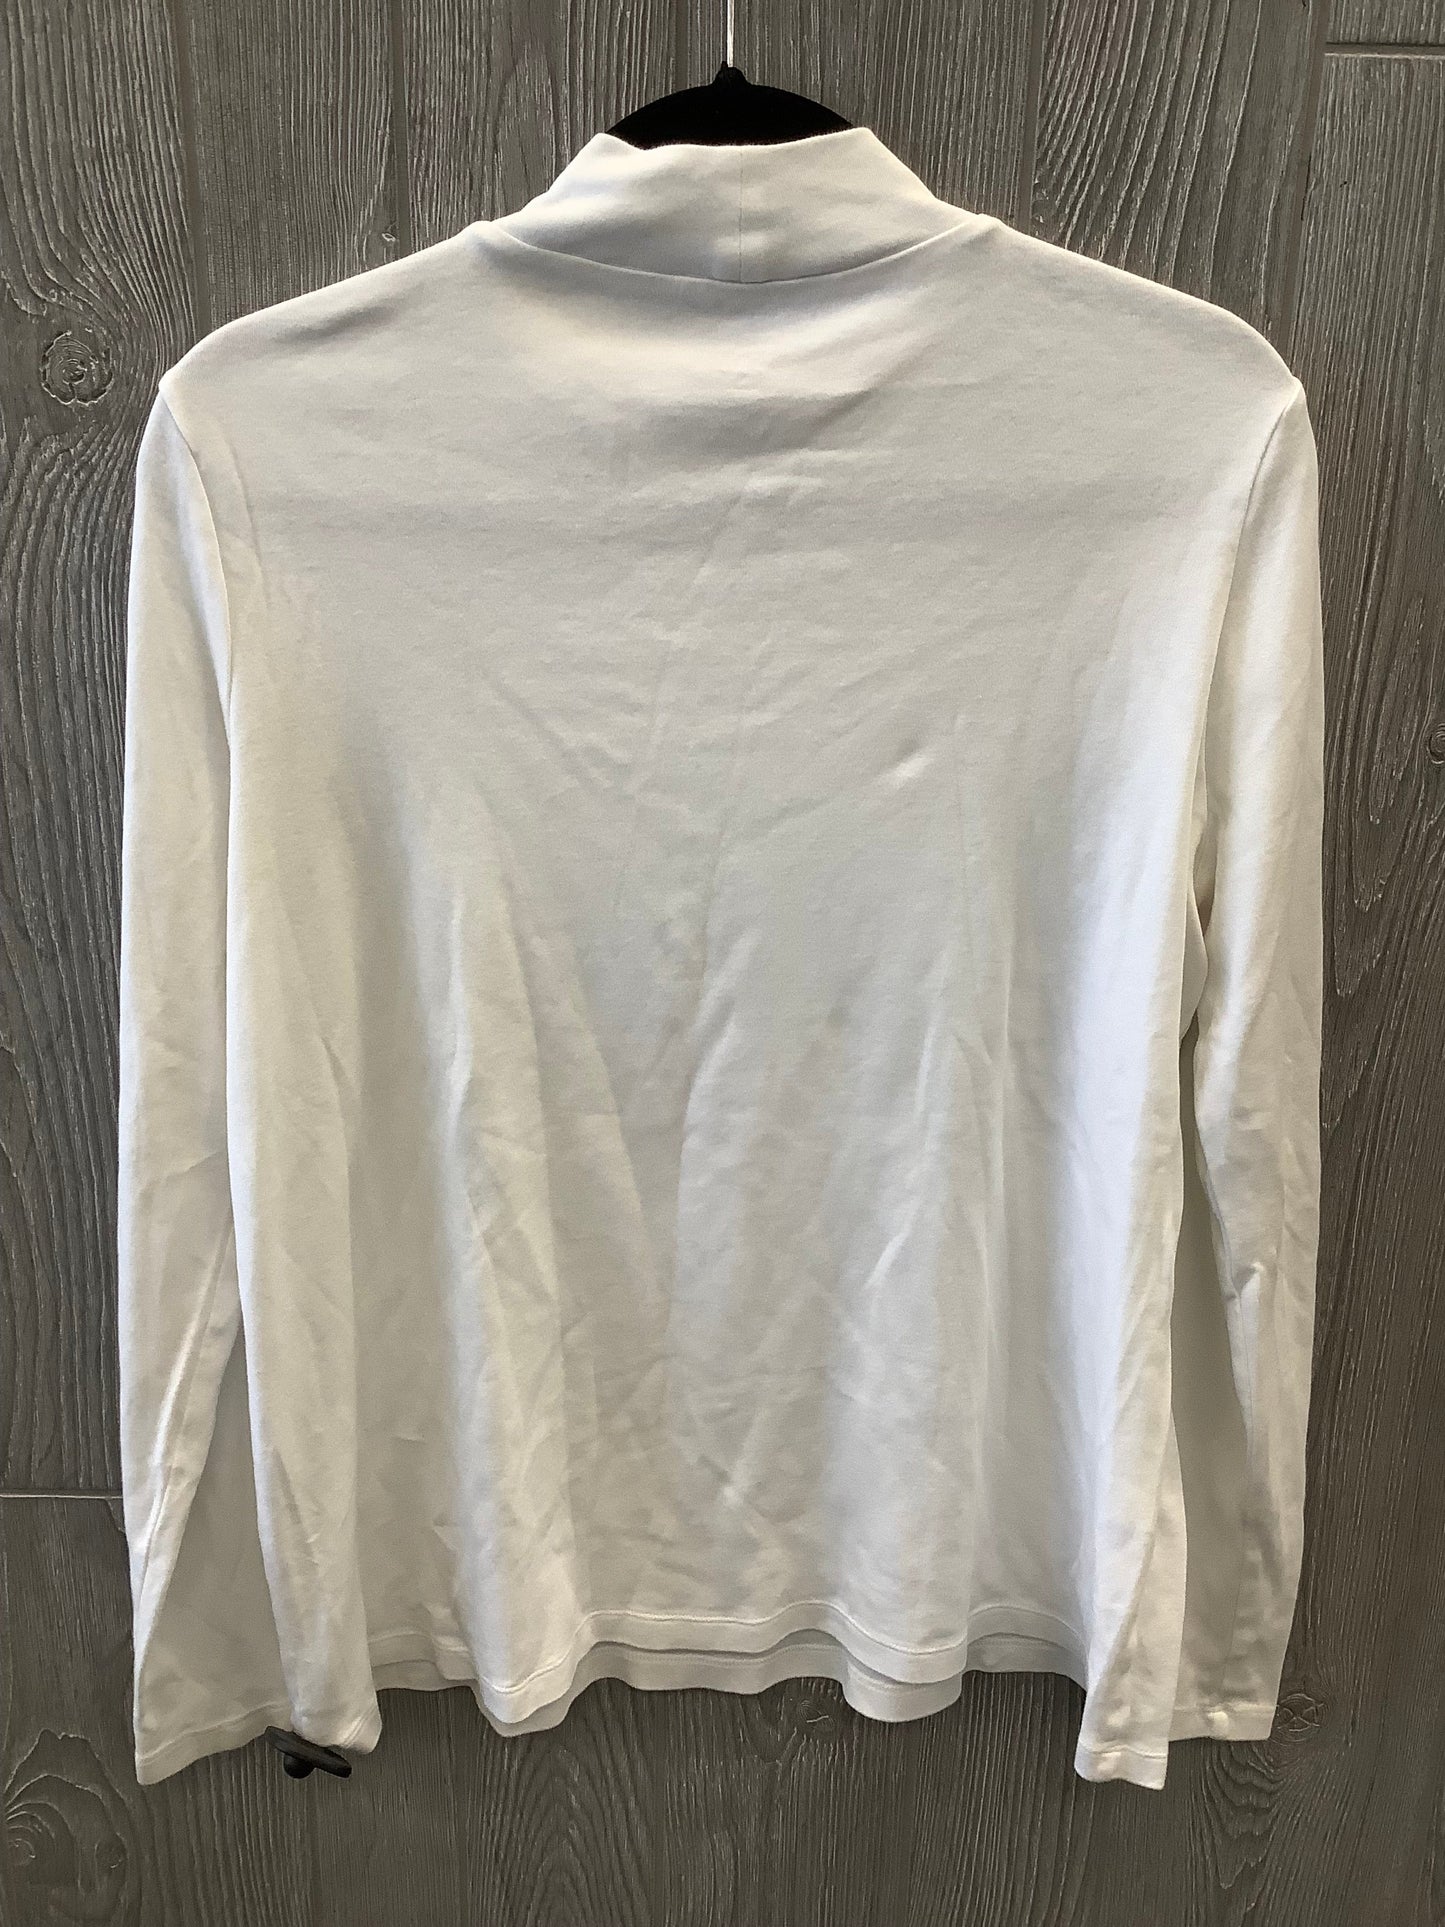 White Top Long Sleeve Kim Rogers, Size L